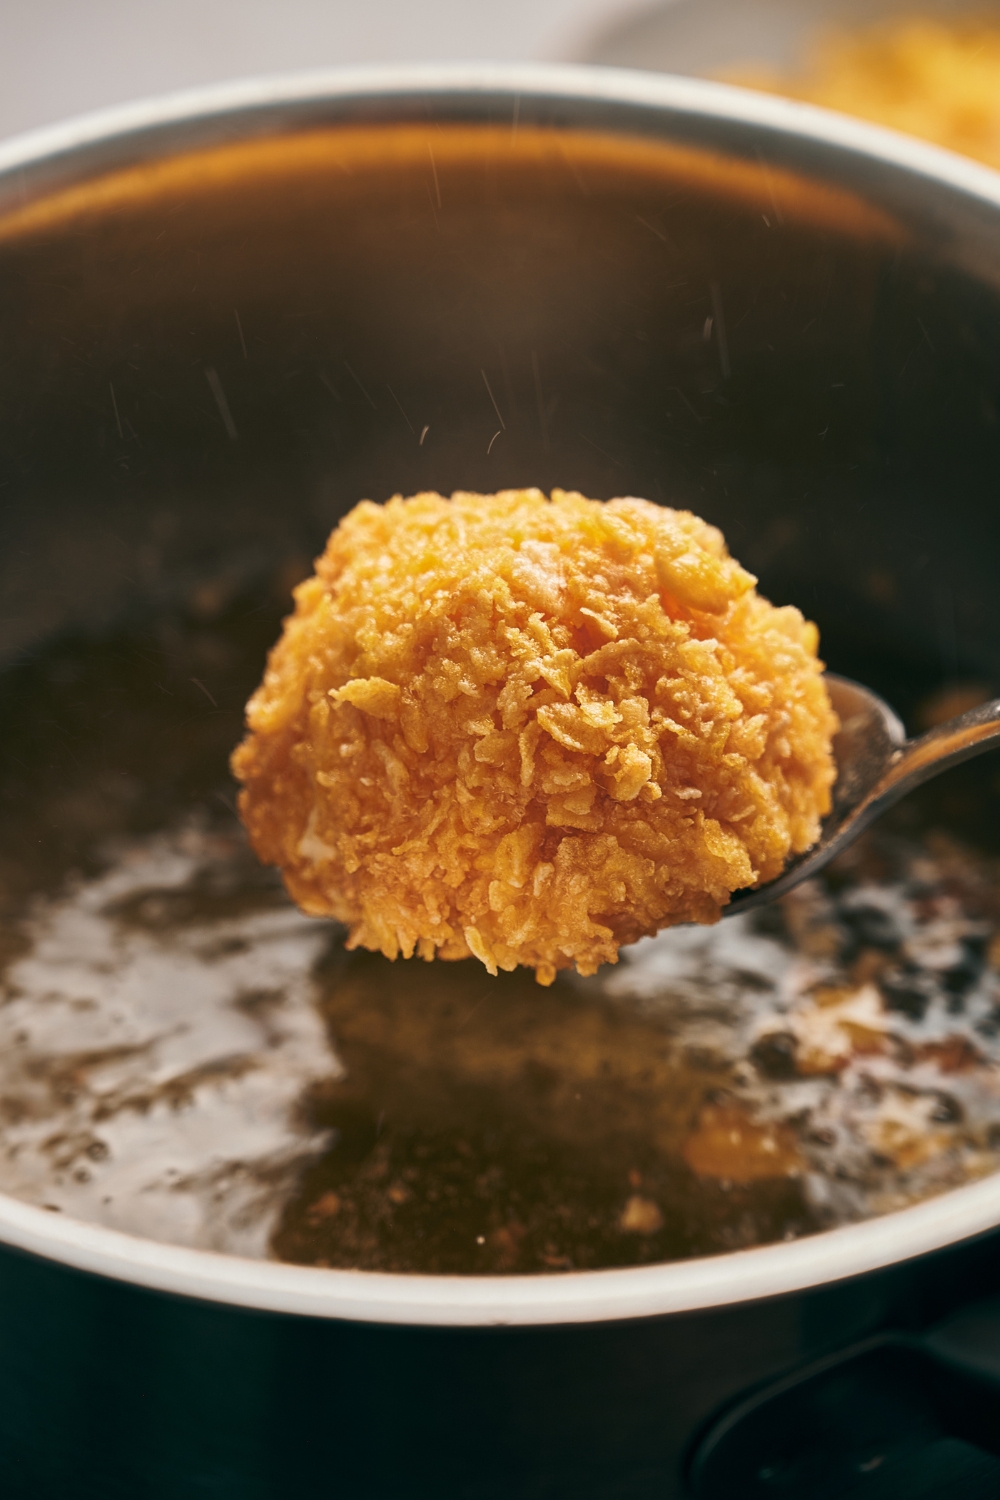 A spoon is holding a fried ice cream ball over a pot with hot oil.